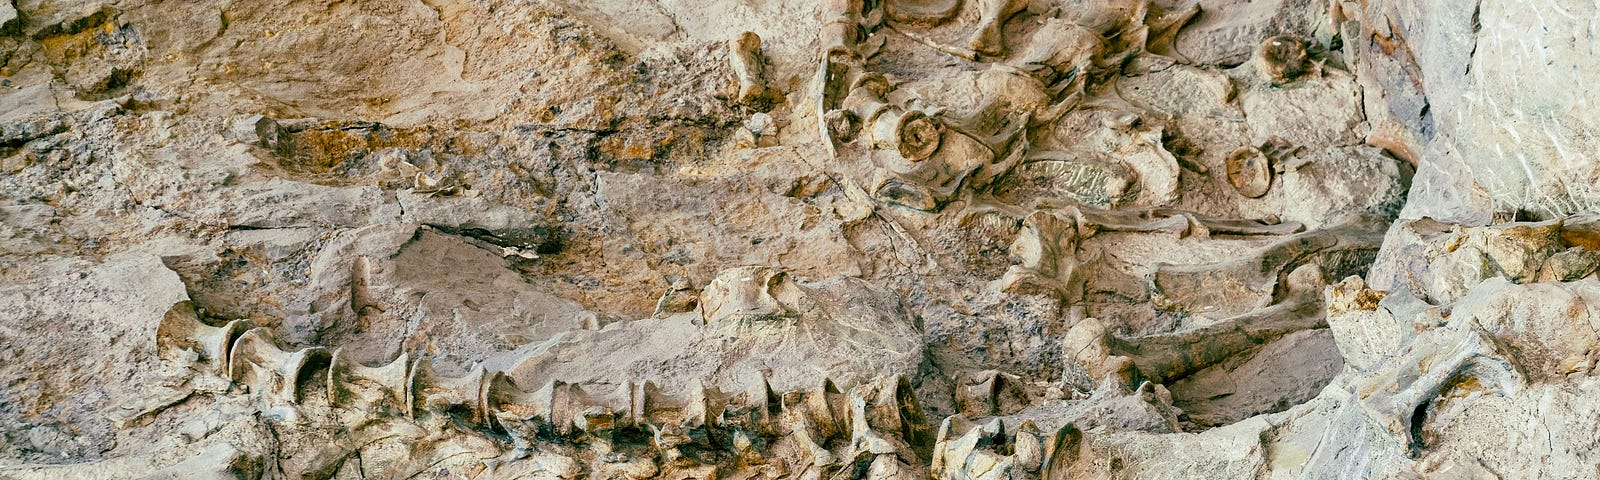 The vertebrae and other fossilised bones of a dinosaur protrude from a beige-coloured rockface.